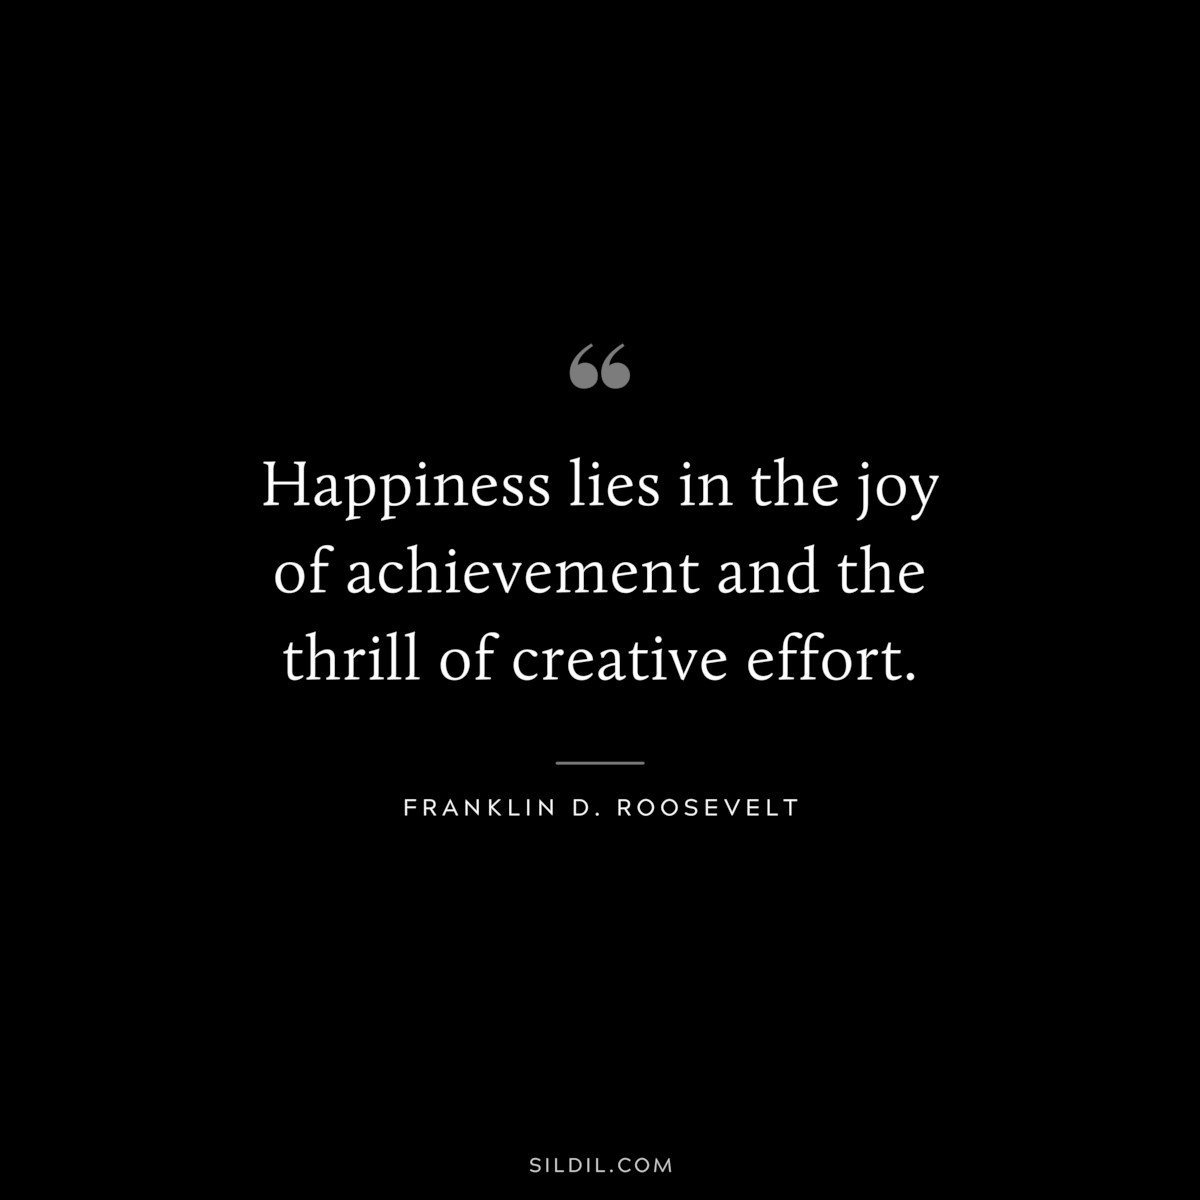 Happiness lies in the joy of achievement and the thrill of creative effort. ― Franklin D. Roosevelt